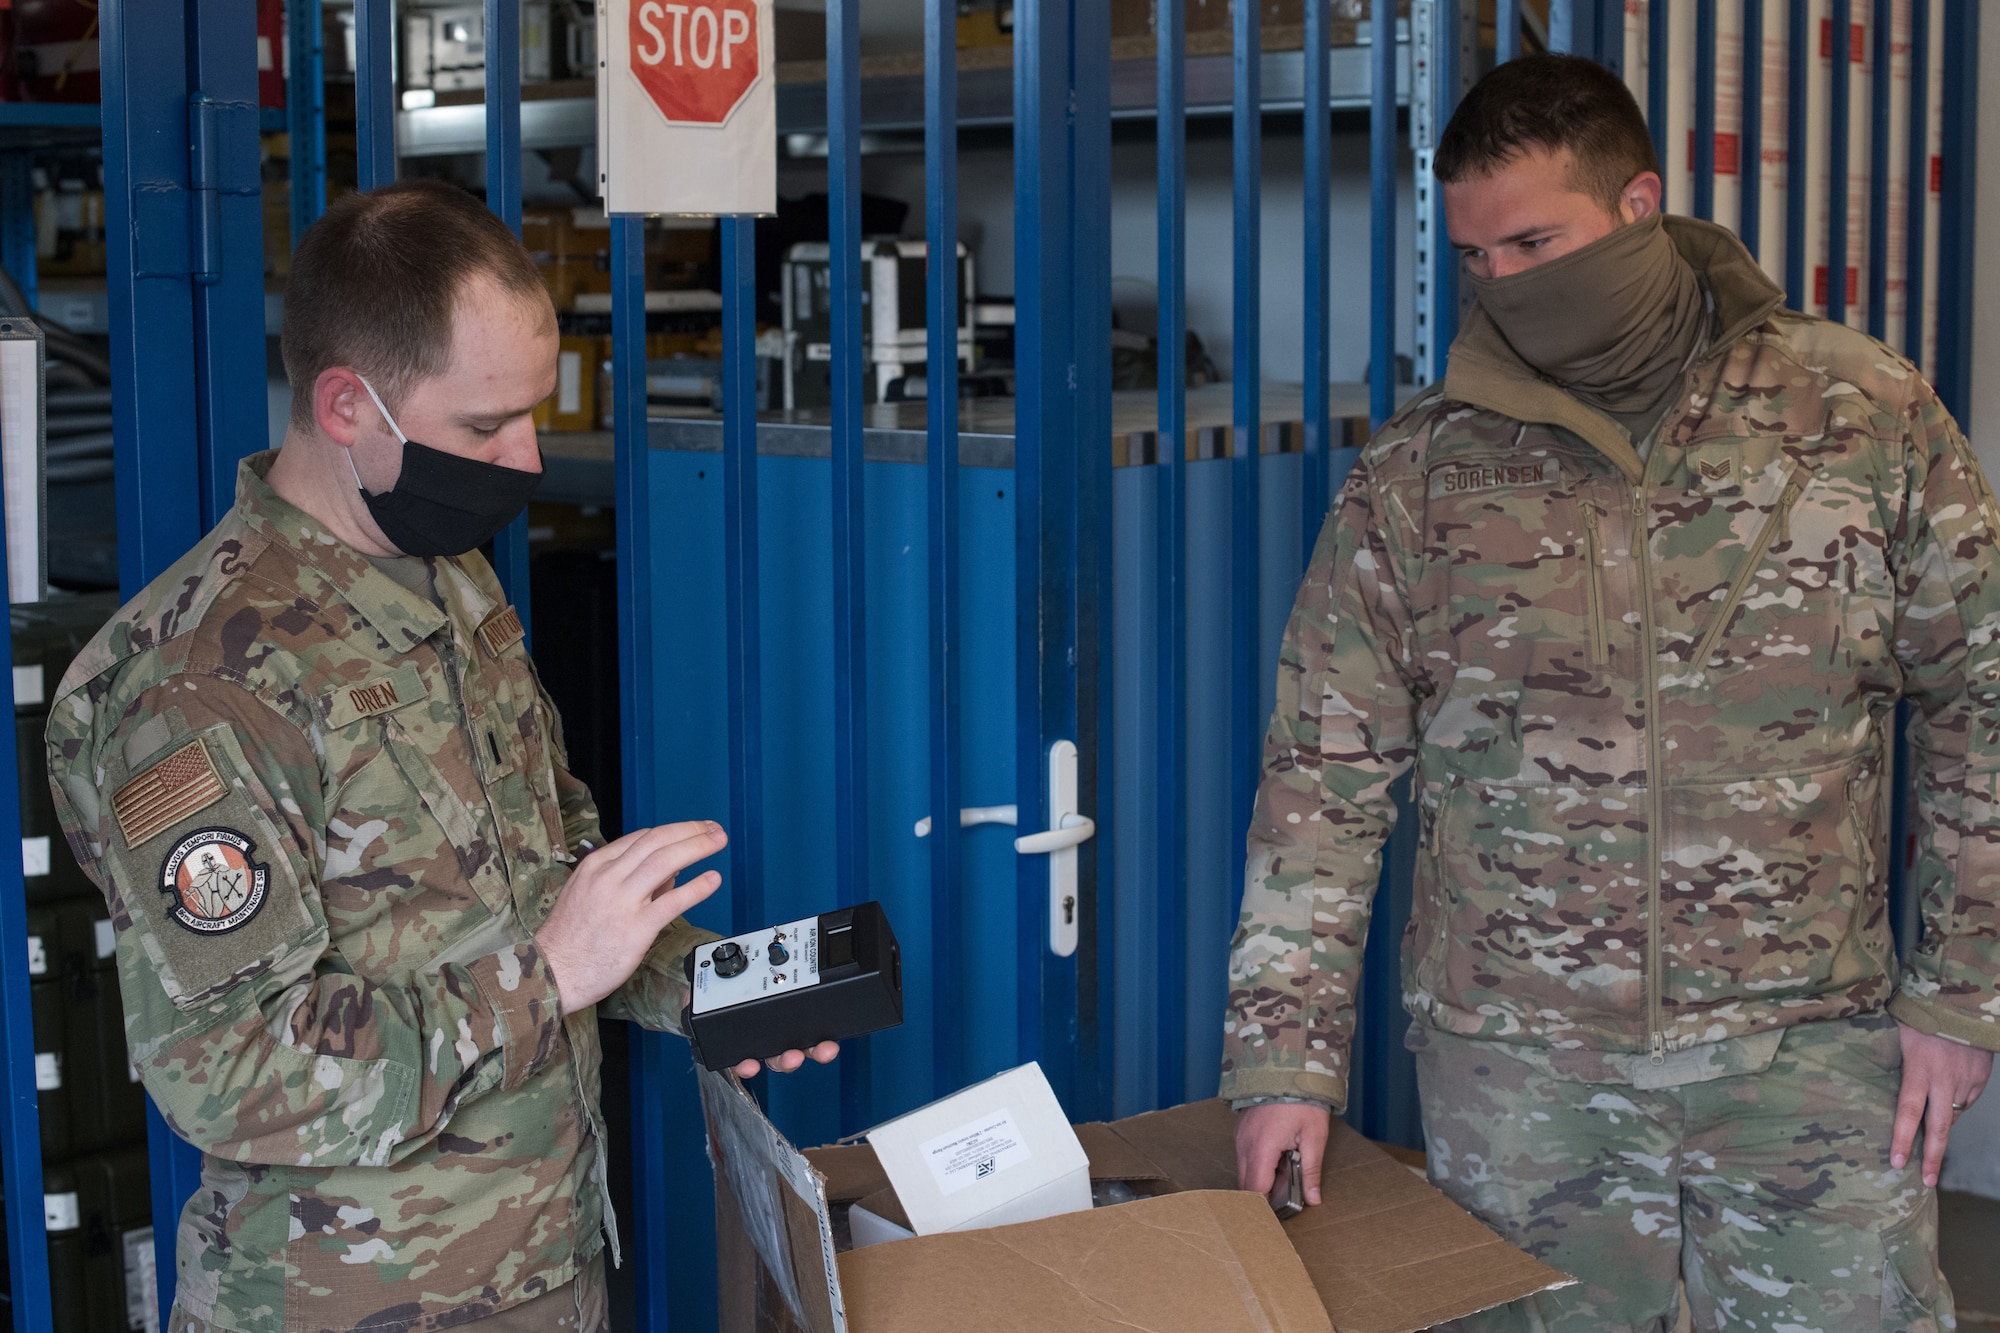 Two Airmen looking at an ion counting device.